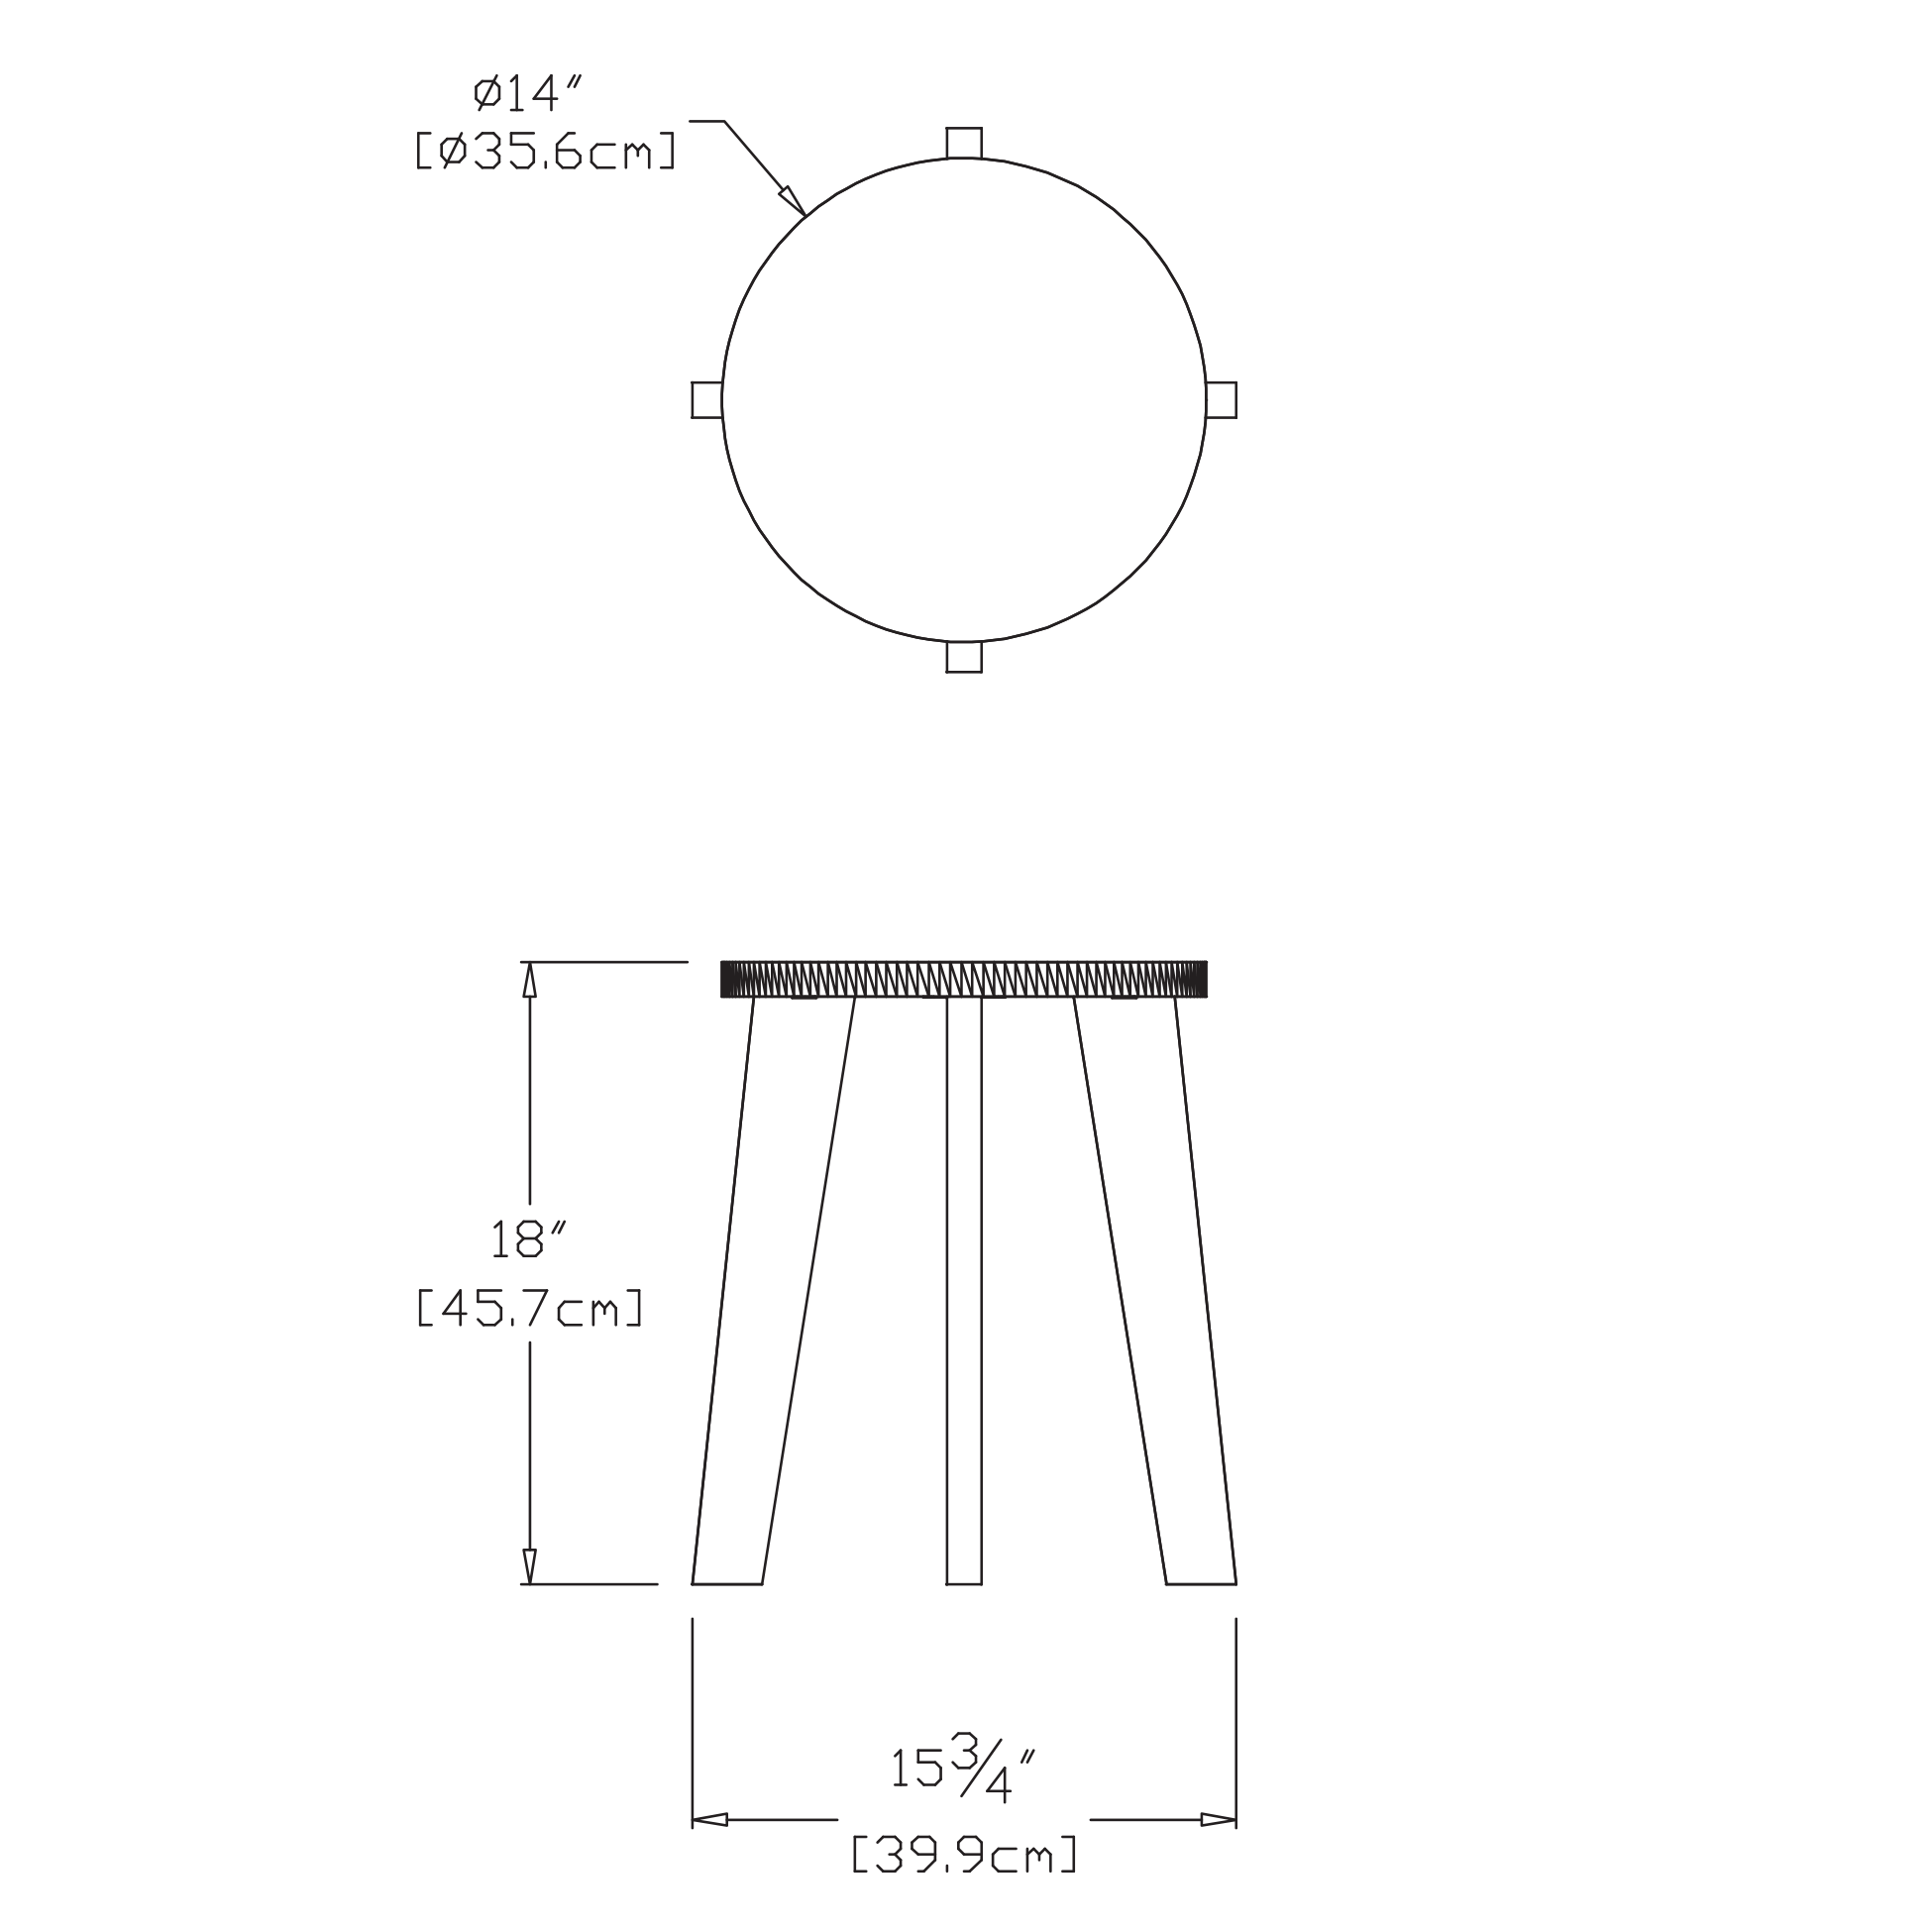 Norm Dining Stool Dimensions